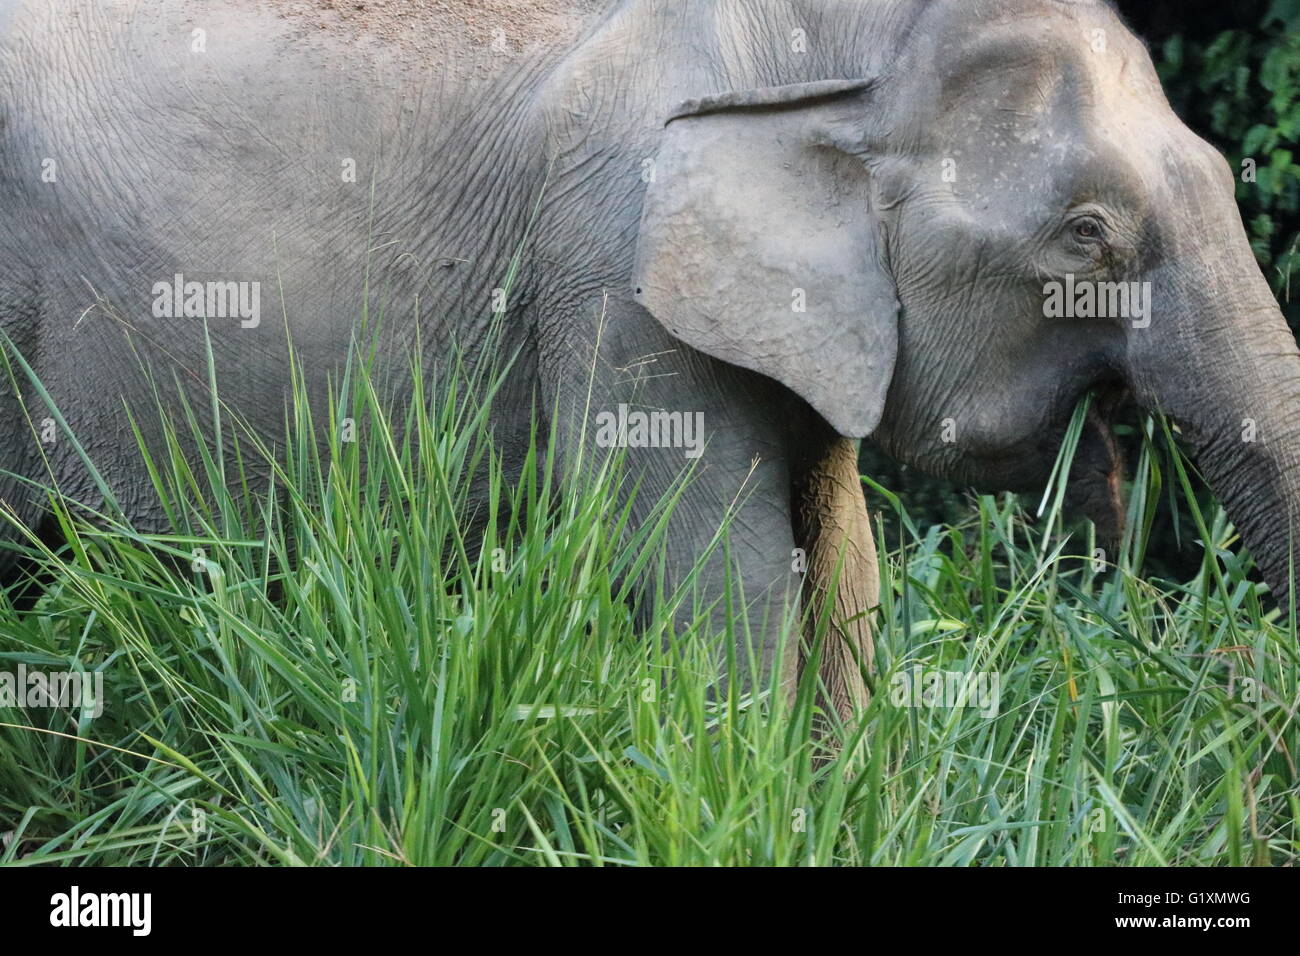 An endangered Bornean pygmy elephant Elephas maximus borneensis eating grass by the side of a road in Maliau Basin, Borneo Stock Photo